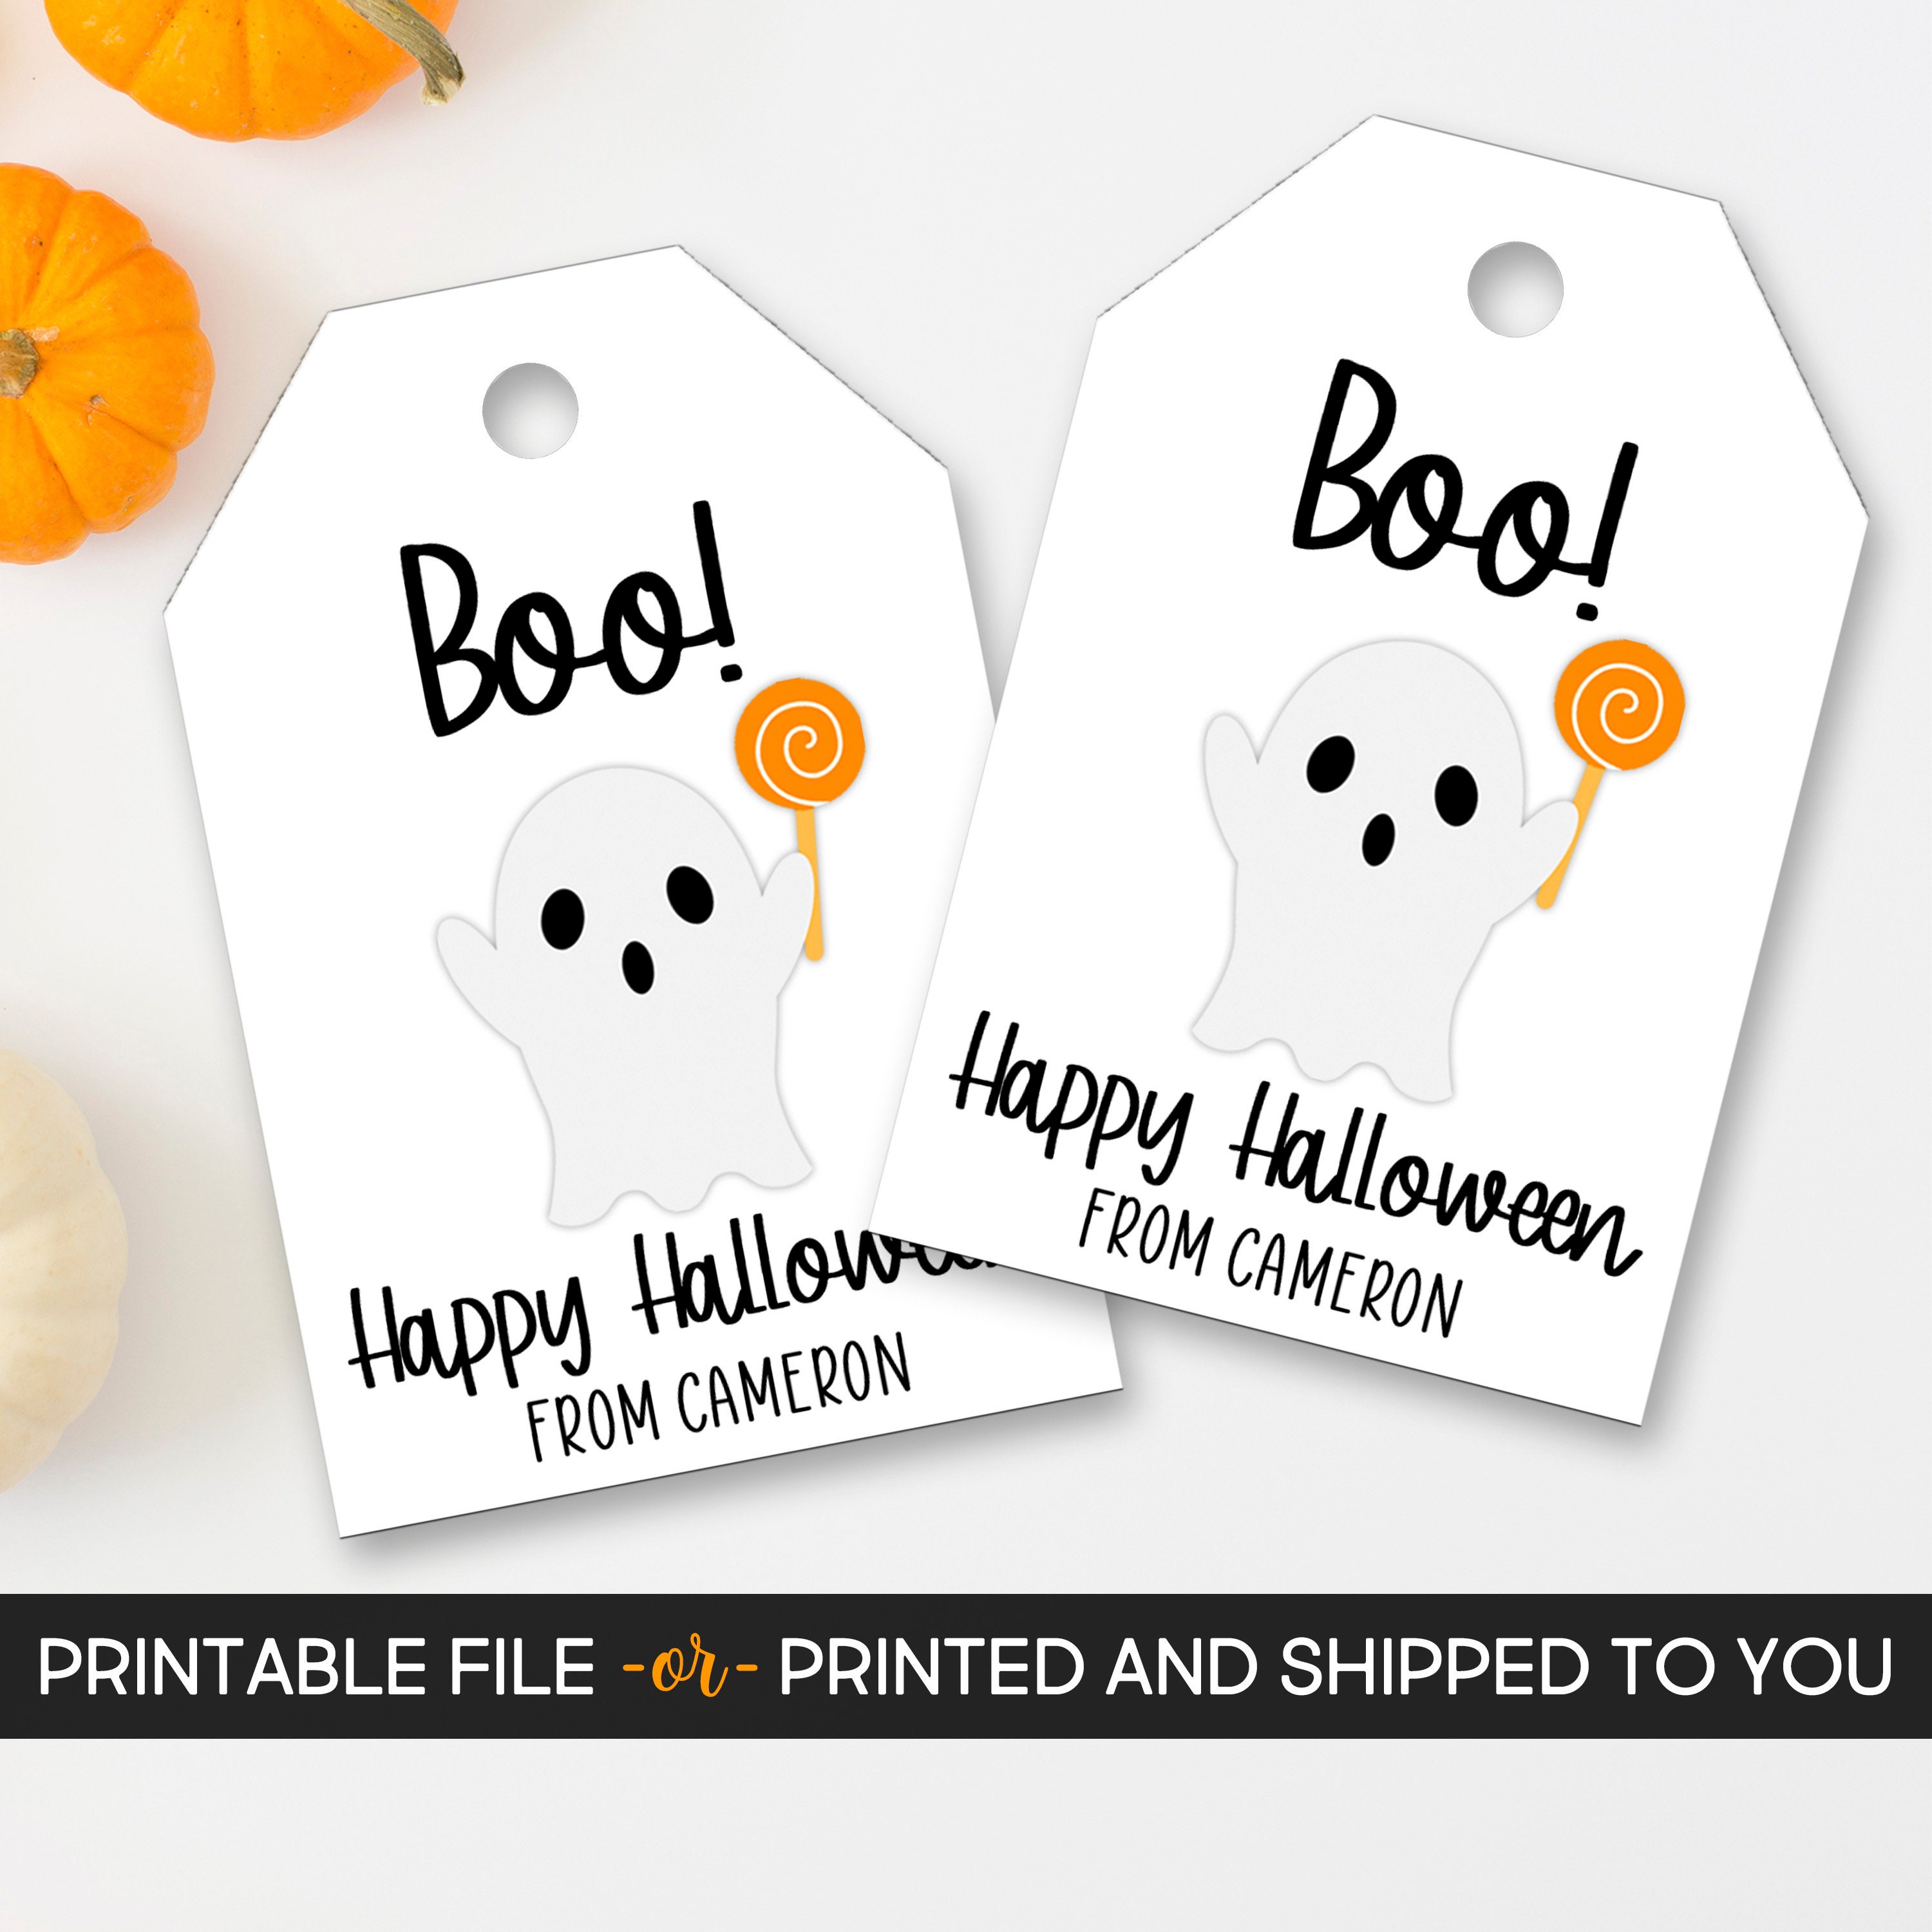 Halloween Party Favor Tags - Printable Gift Tags For Kids - Wicked –  CraftyKizzy